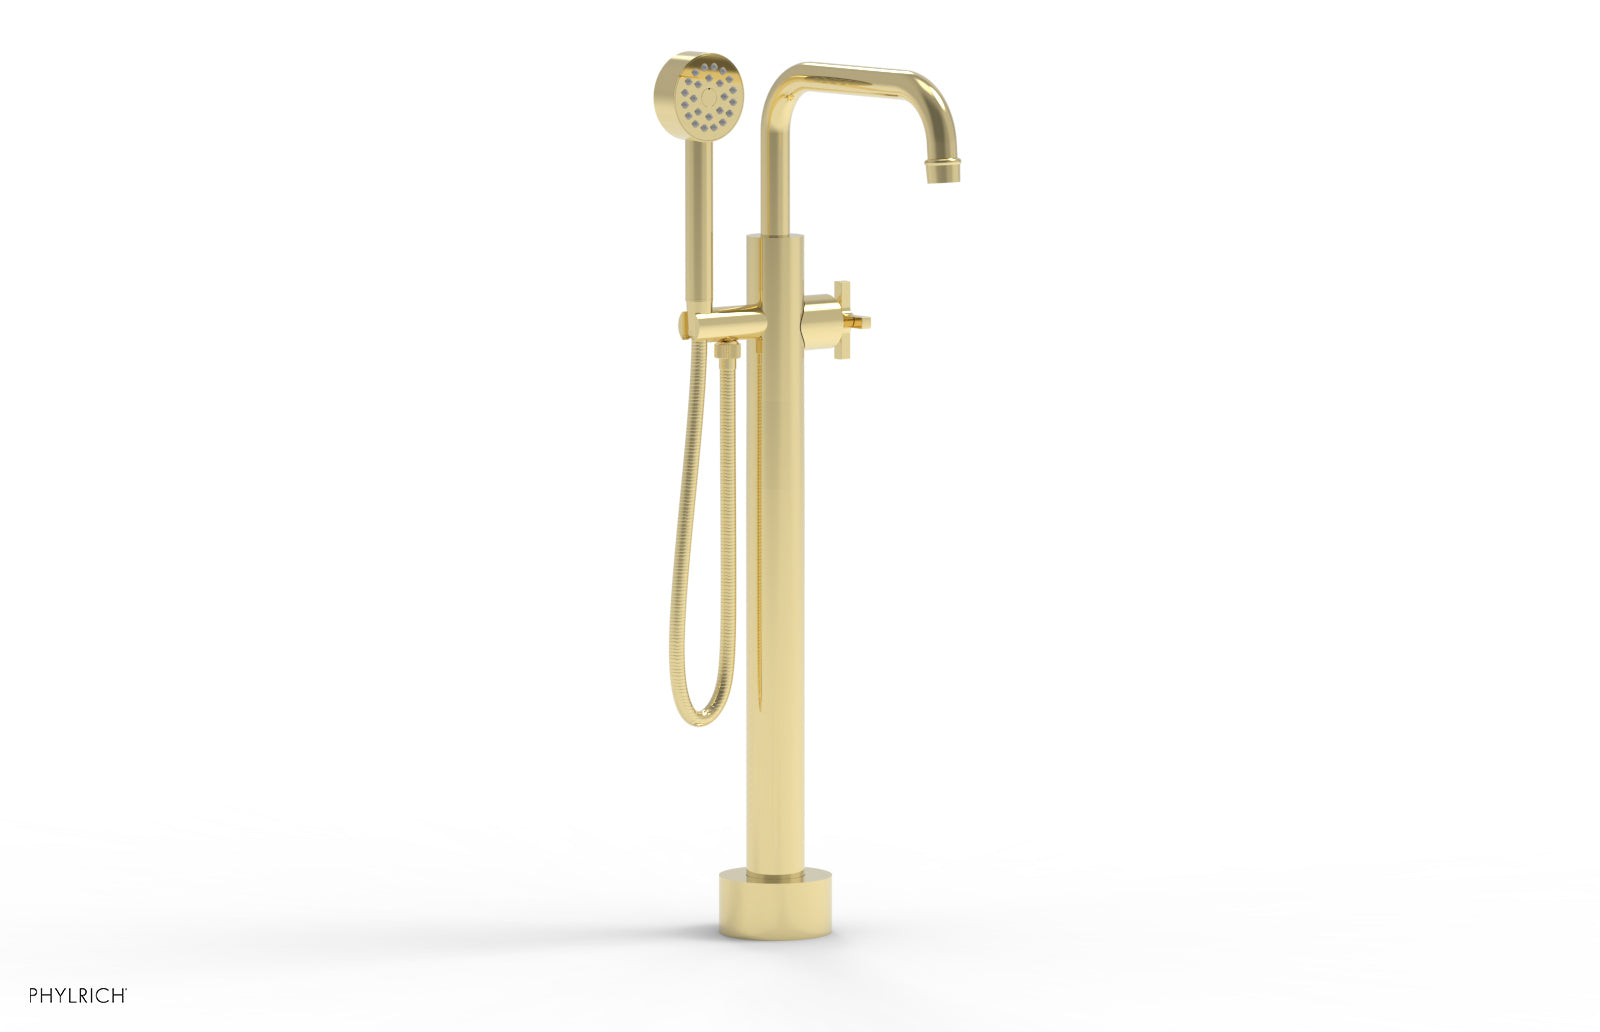 Phylrich HEX MODERN Low Floor Mount Tub Filler - Cross Handle with Hand Shower